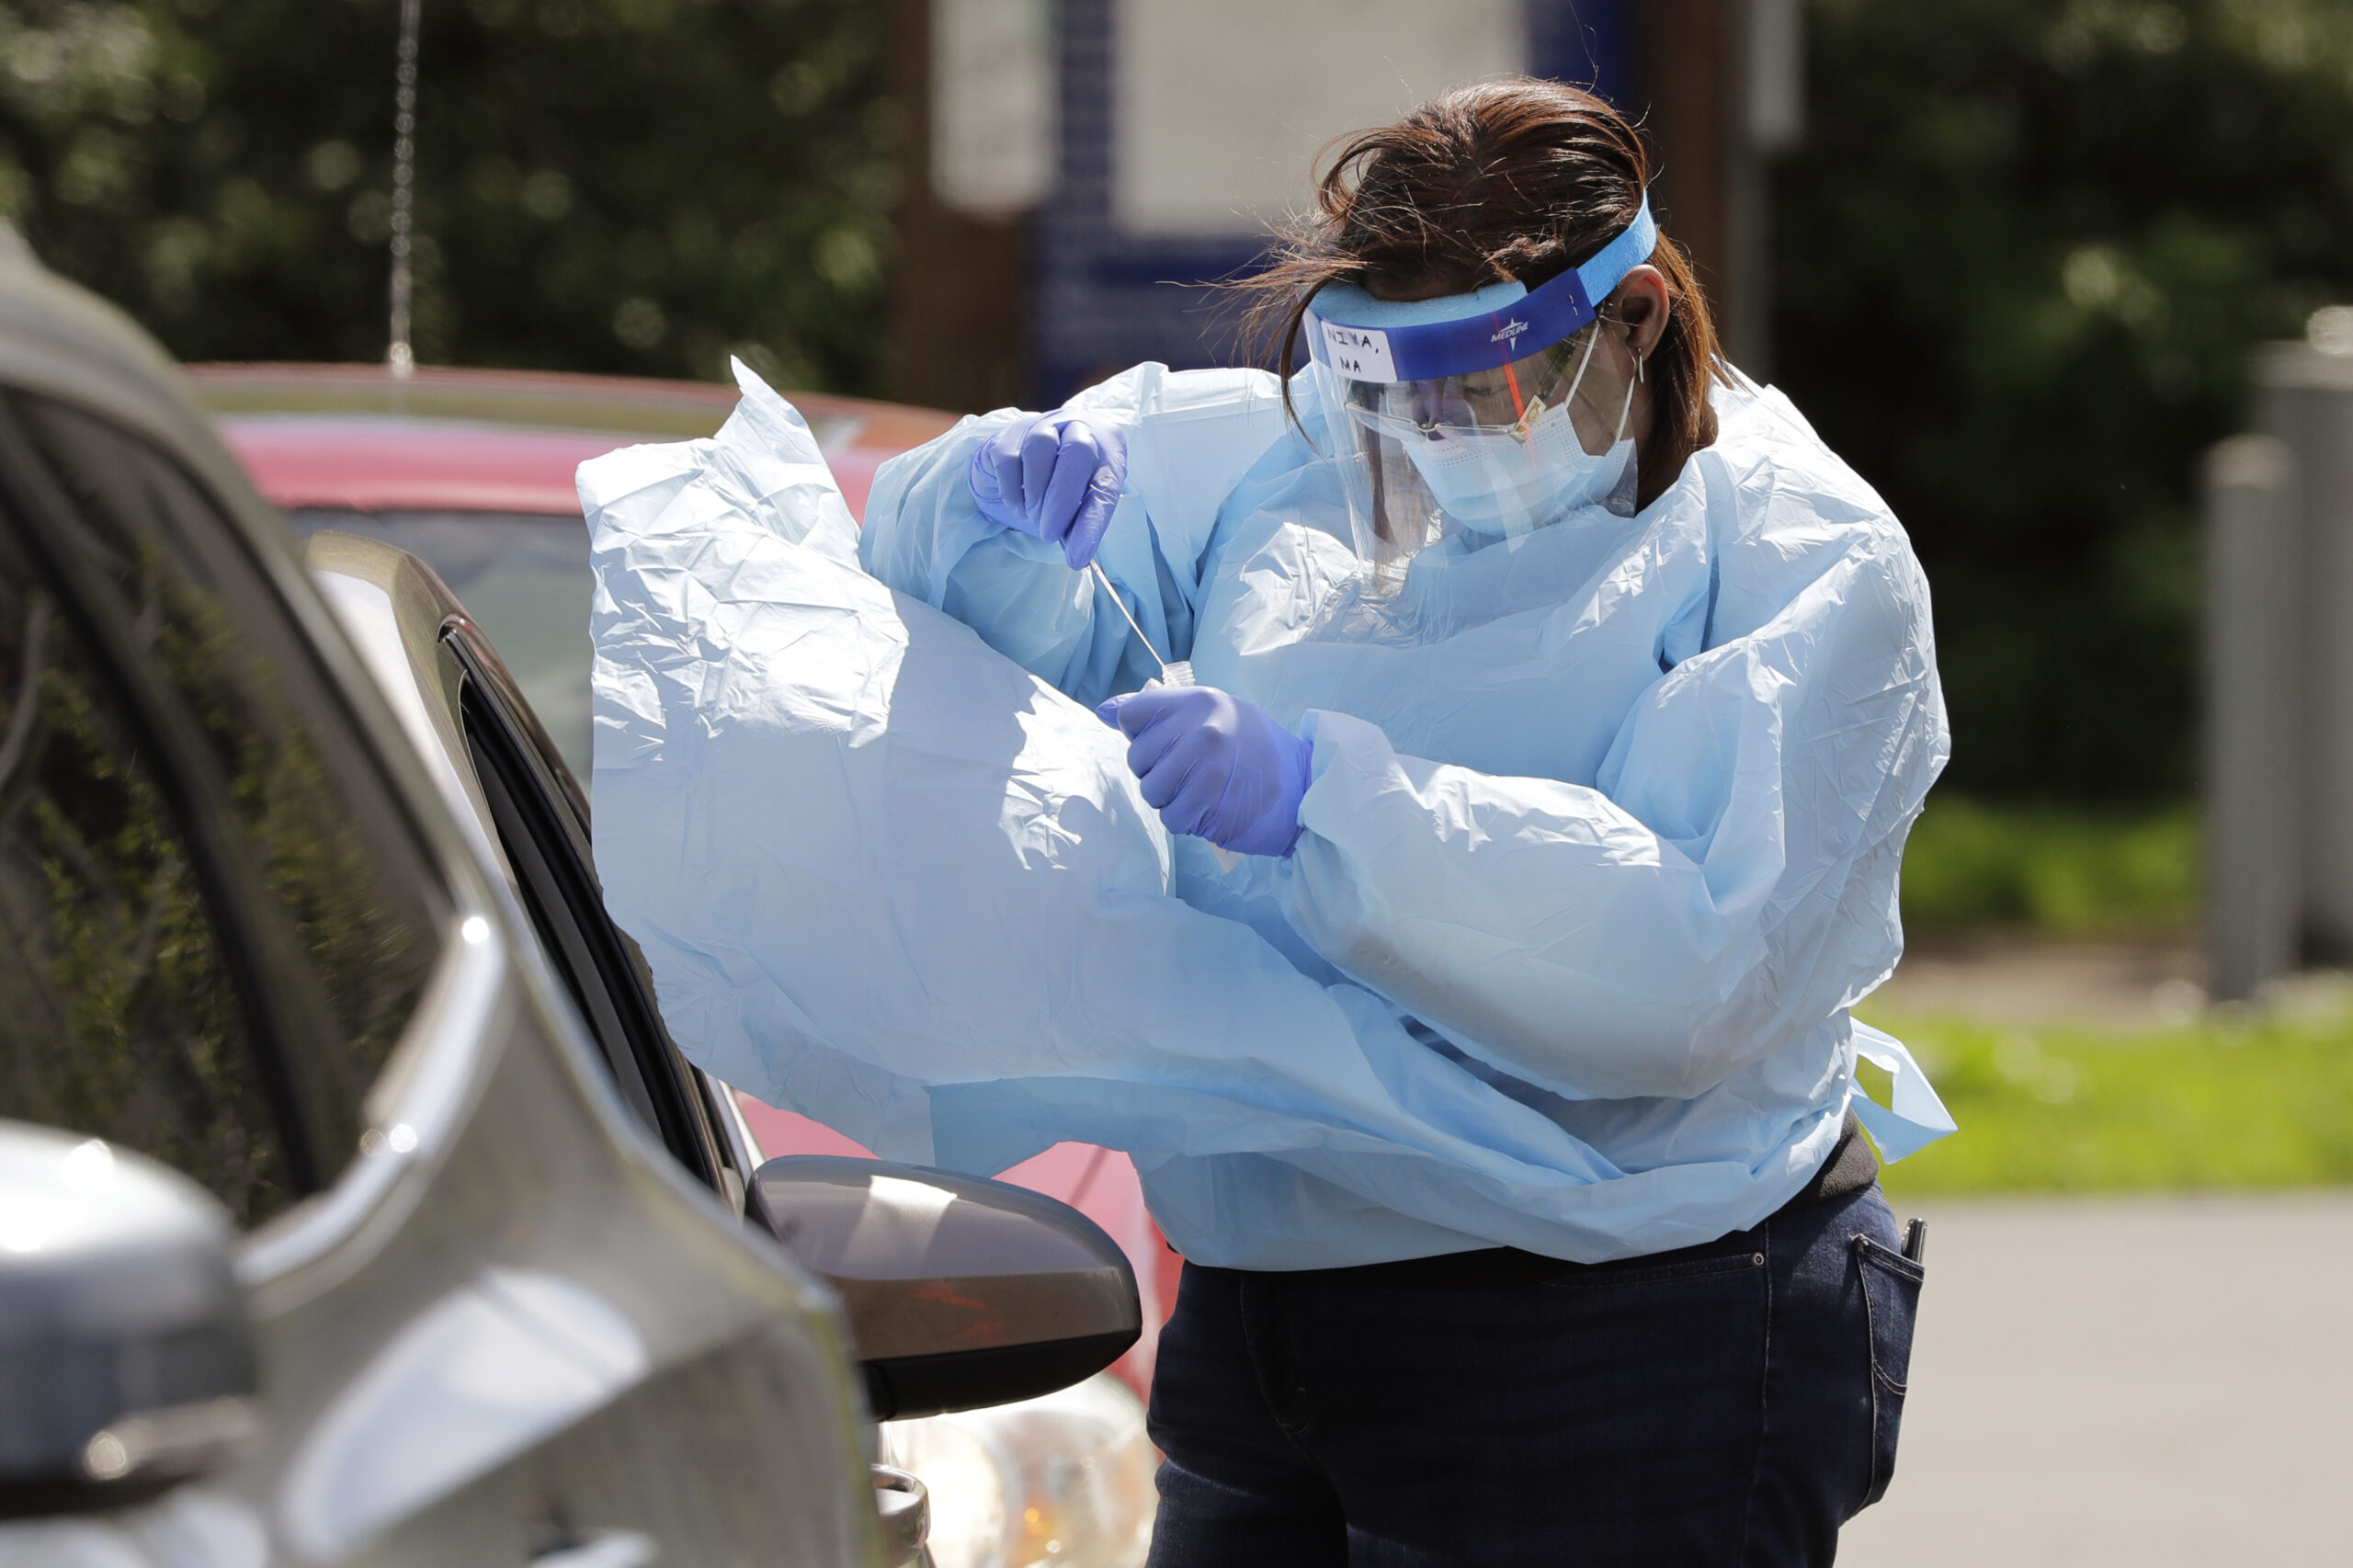 A medical assistant reaches in to take a nasal swab from a driver at a drive-up coronavirus testing site